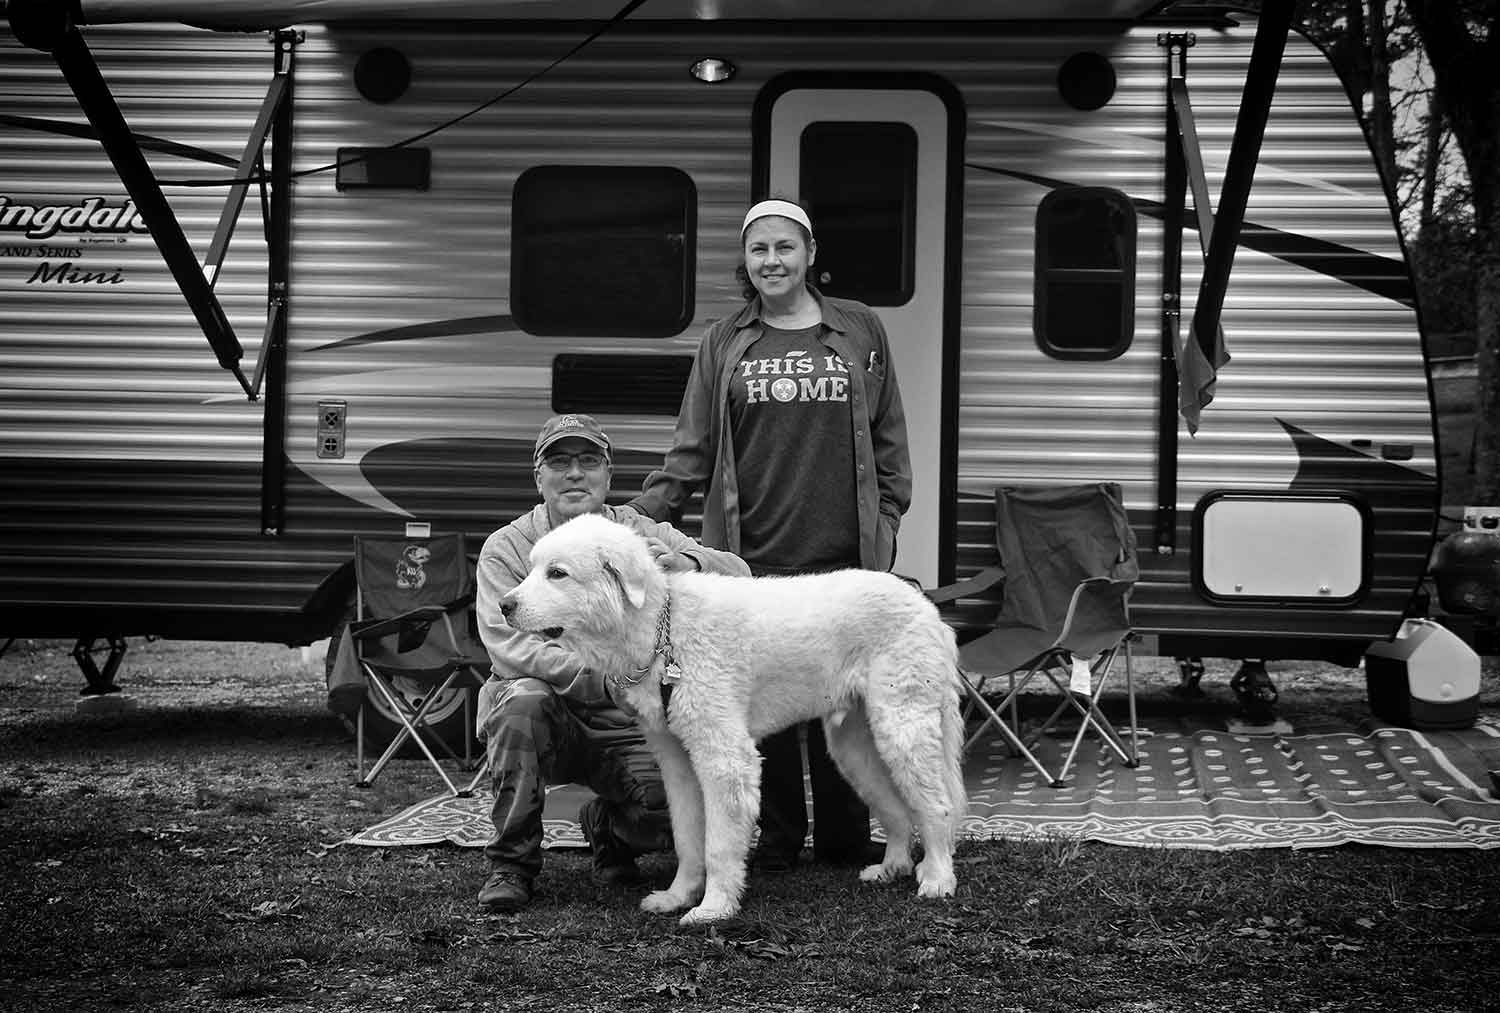 Steven, Marigol, and their dog Olympus from Sevierville, camp at Cove Lake State Park Campground. photo by Caleb Jones - 2018